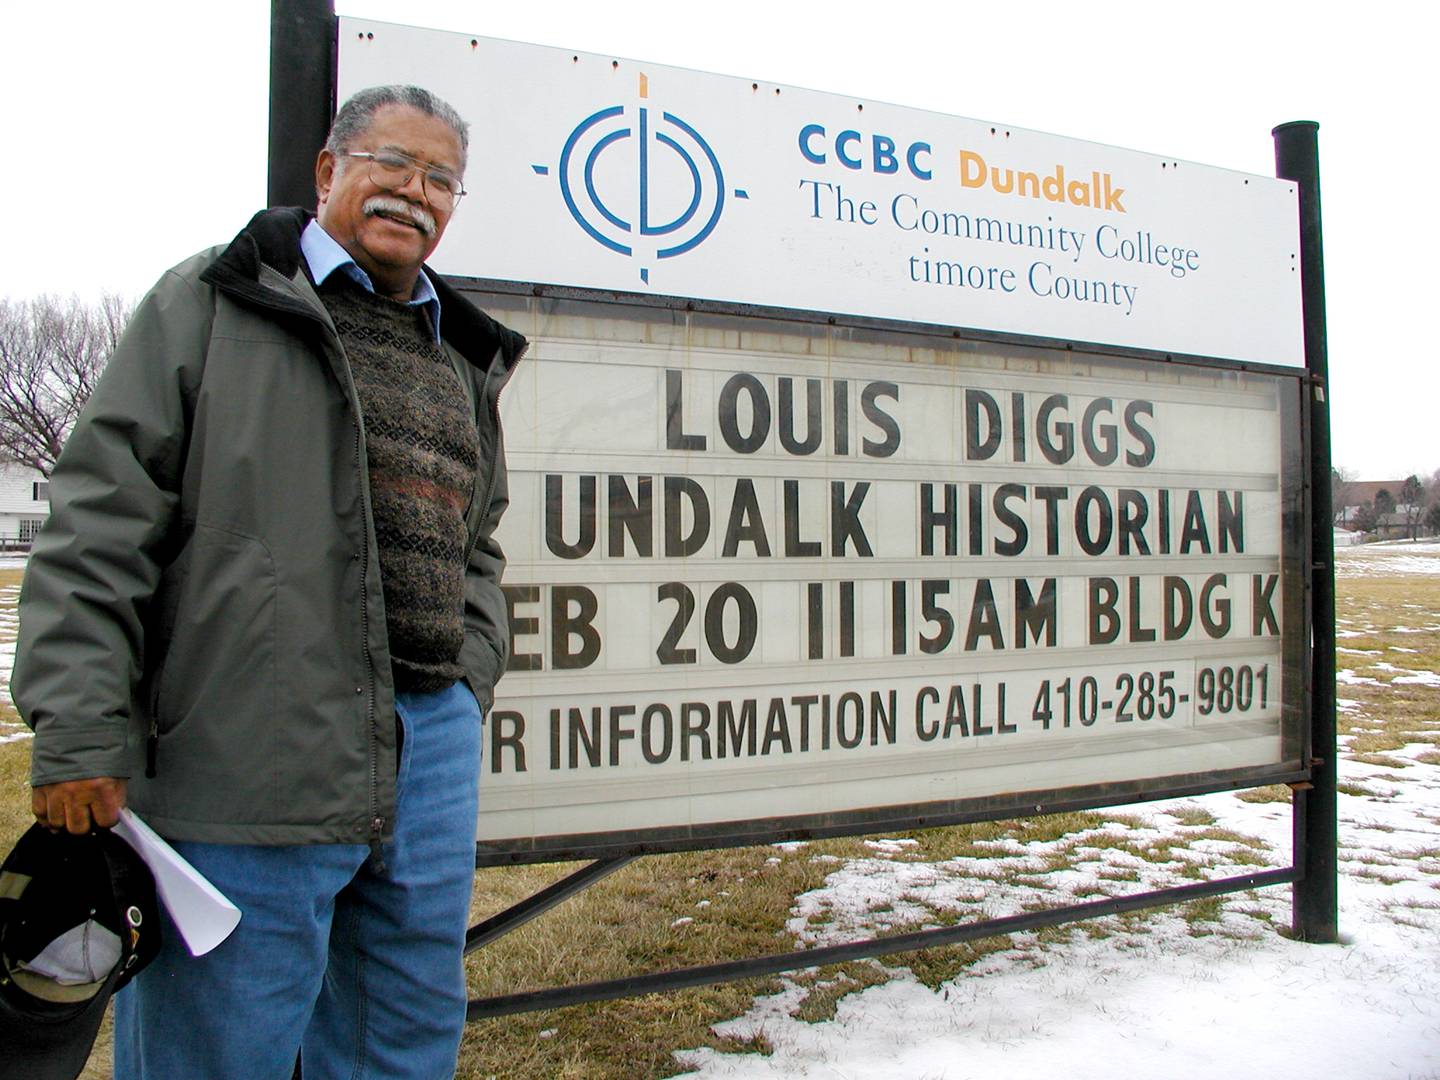 Louis Diggs in 2007 at Community College Baltimore County (CCBC).